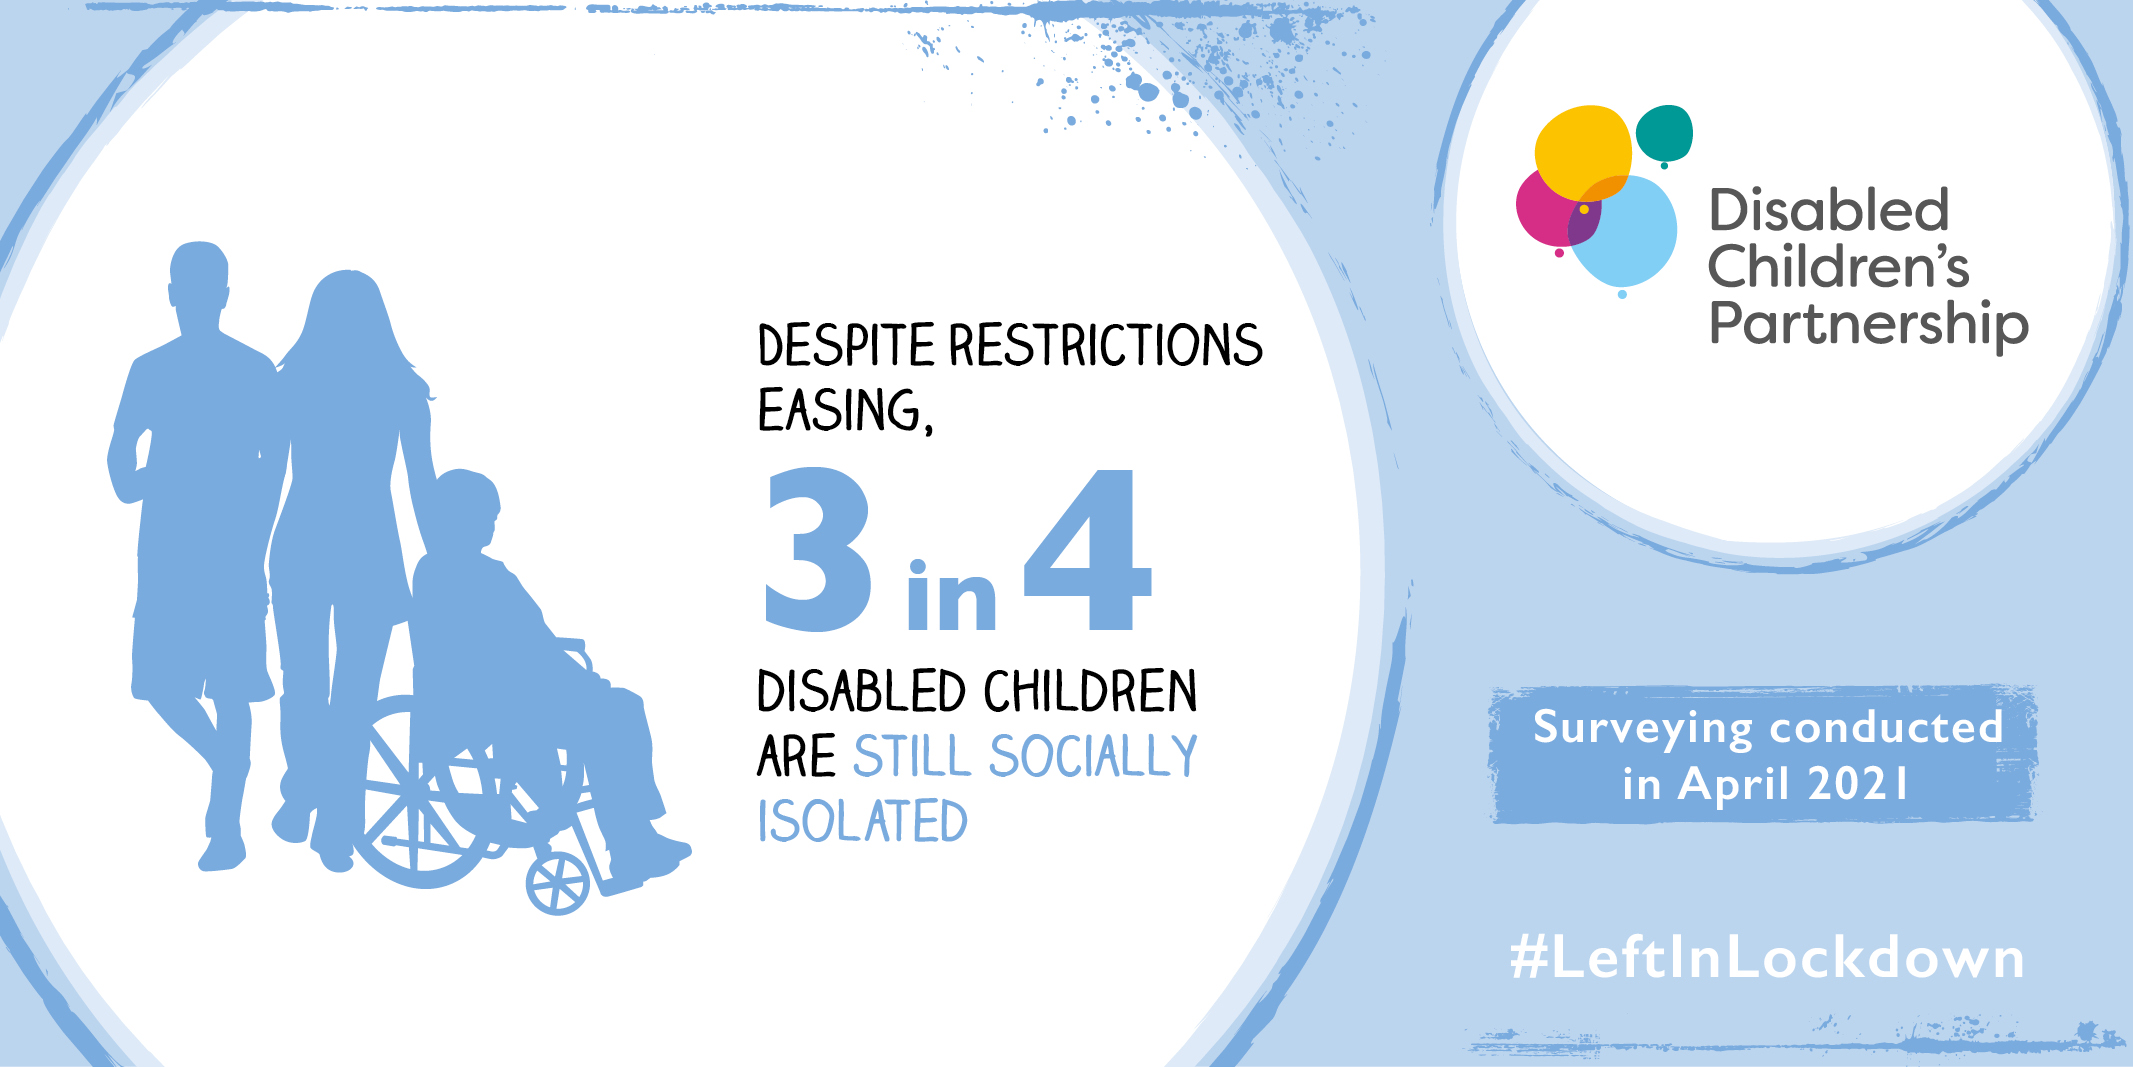 DCP infographic - Despite restrictions easing, 3 in 4 disabled children are still socially isolated